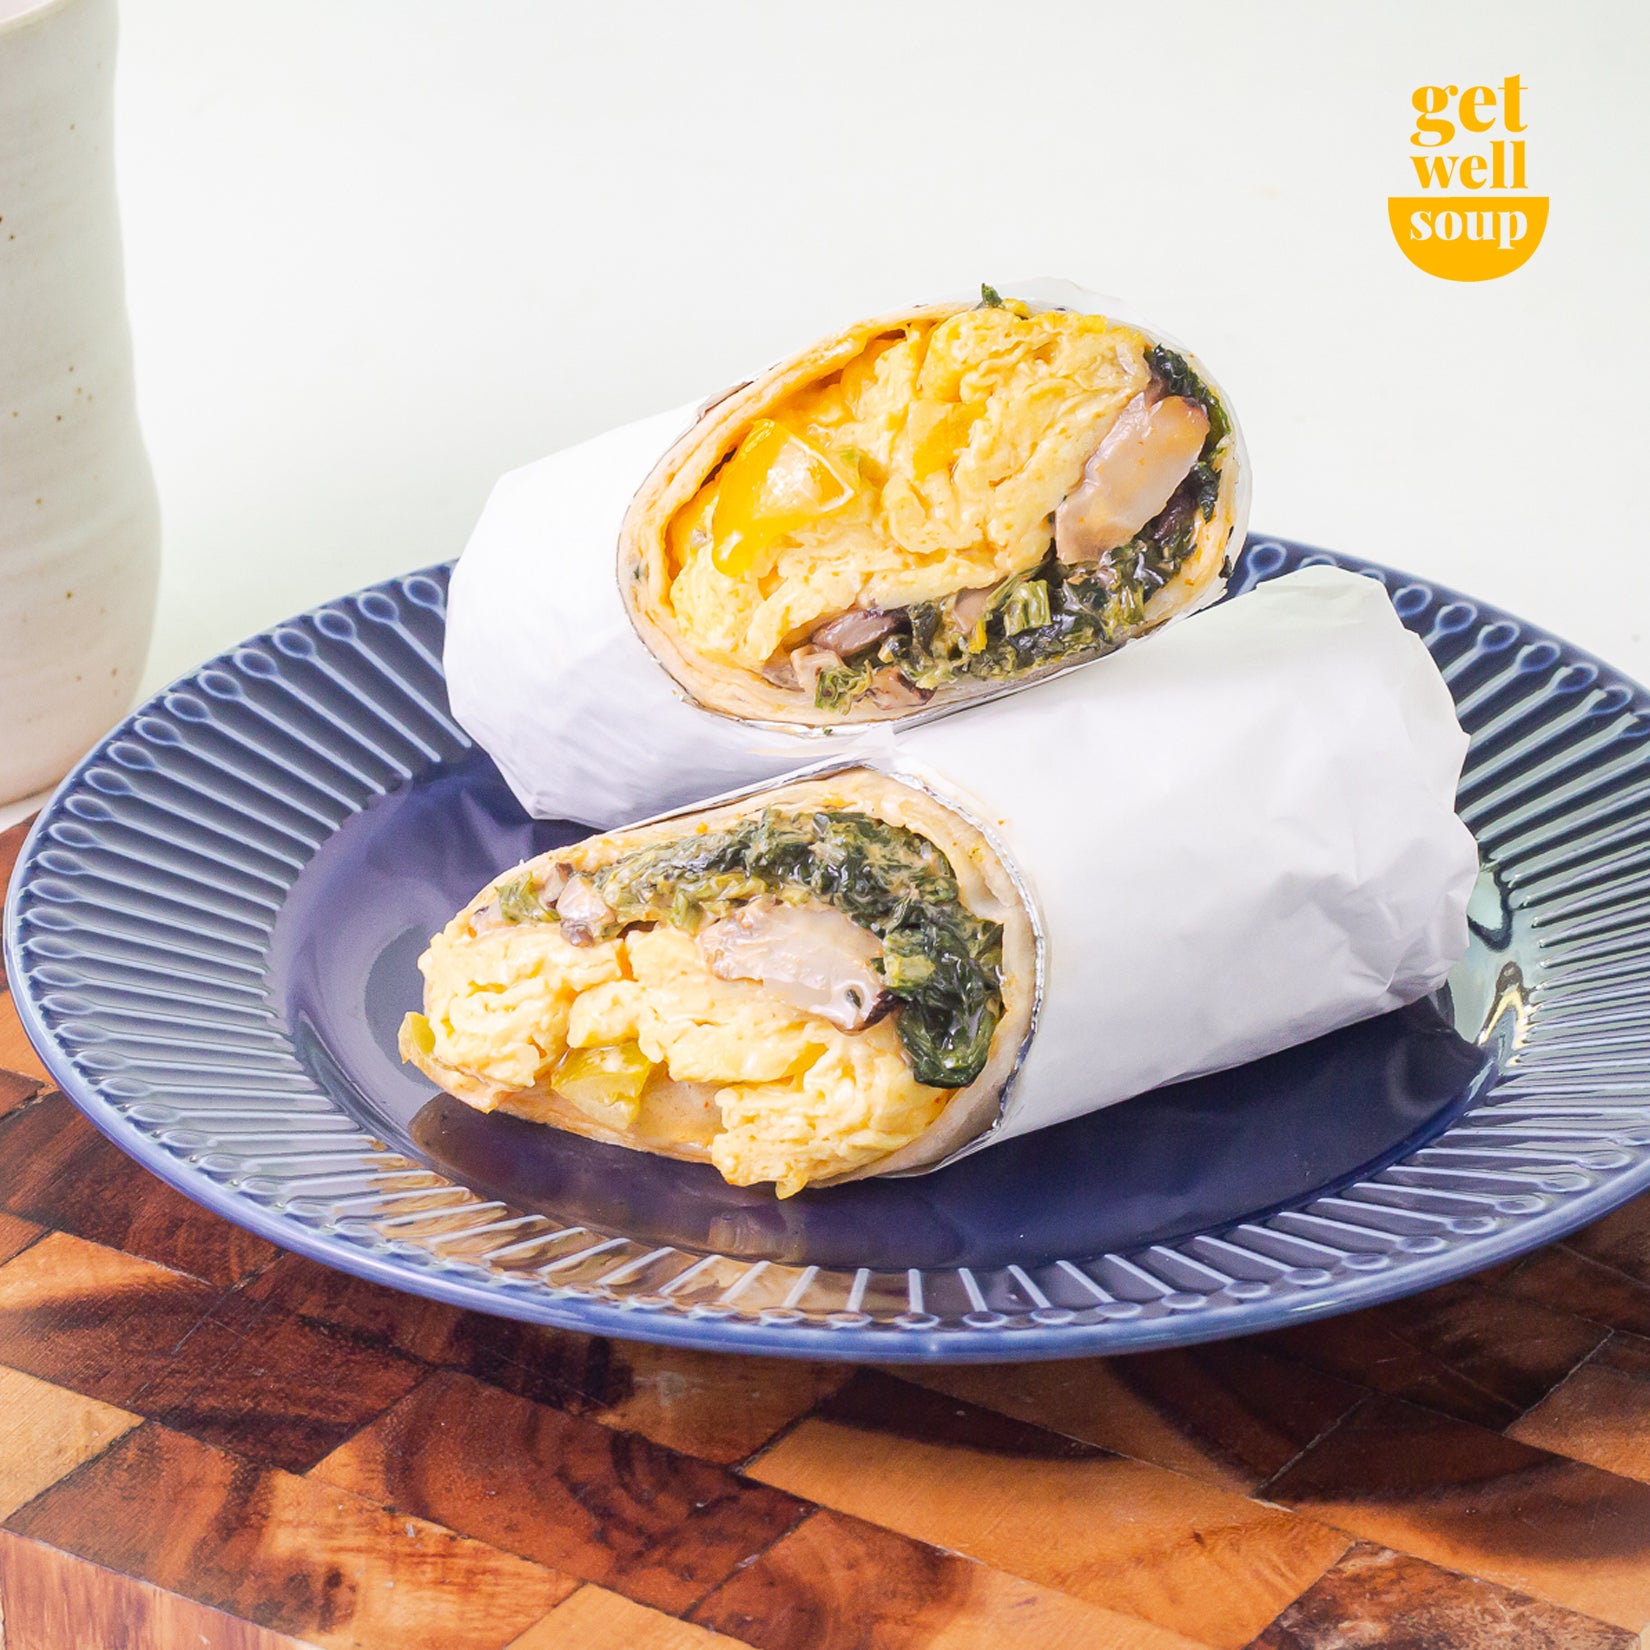 creamy spinach and mushroom wrap | spinach wrap | mushroom wrap | get well soup